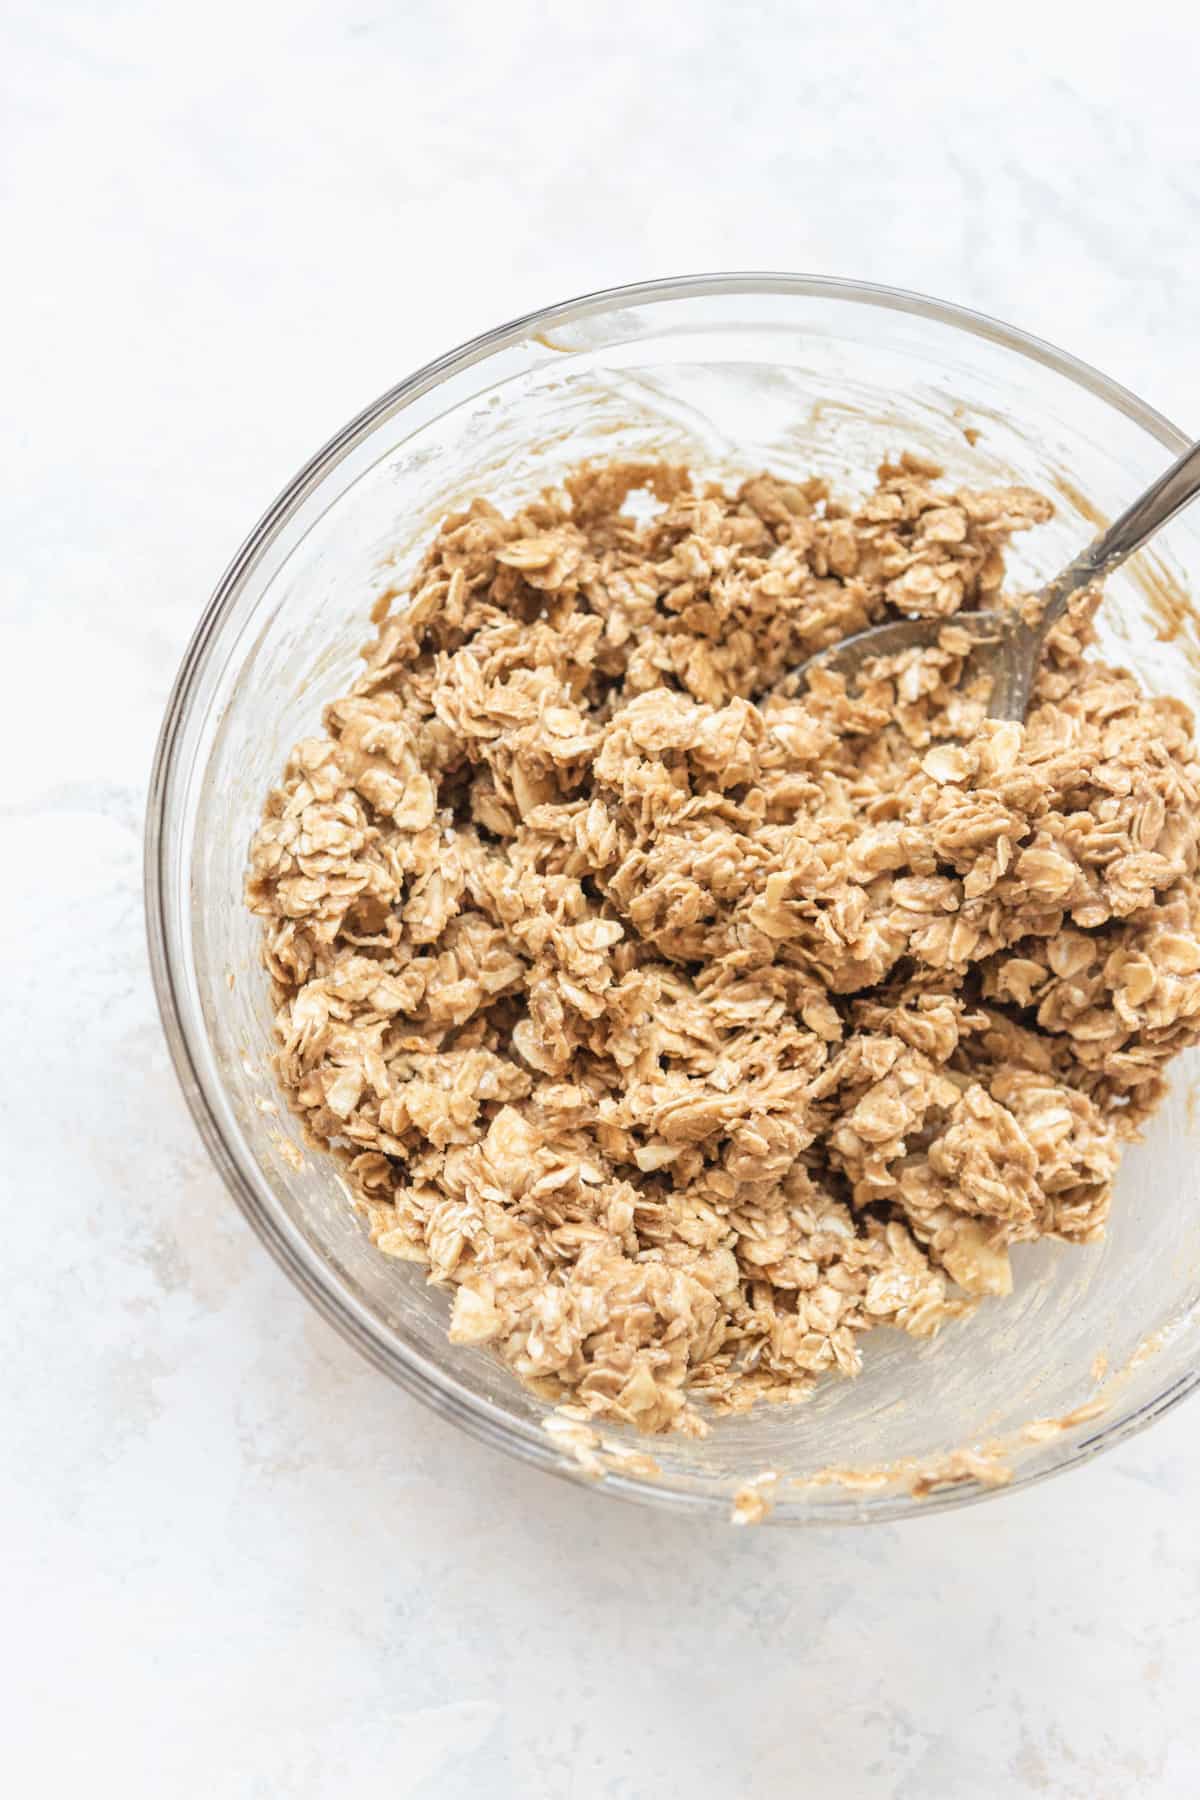 Oats, almonds, almond butter, and honey mixed together in a bowl.